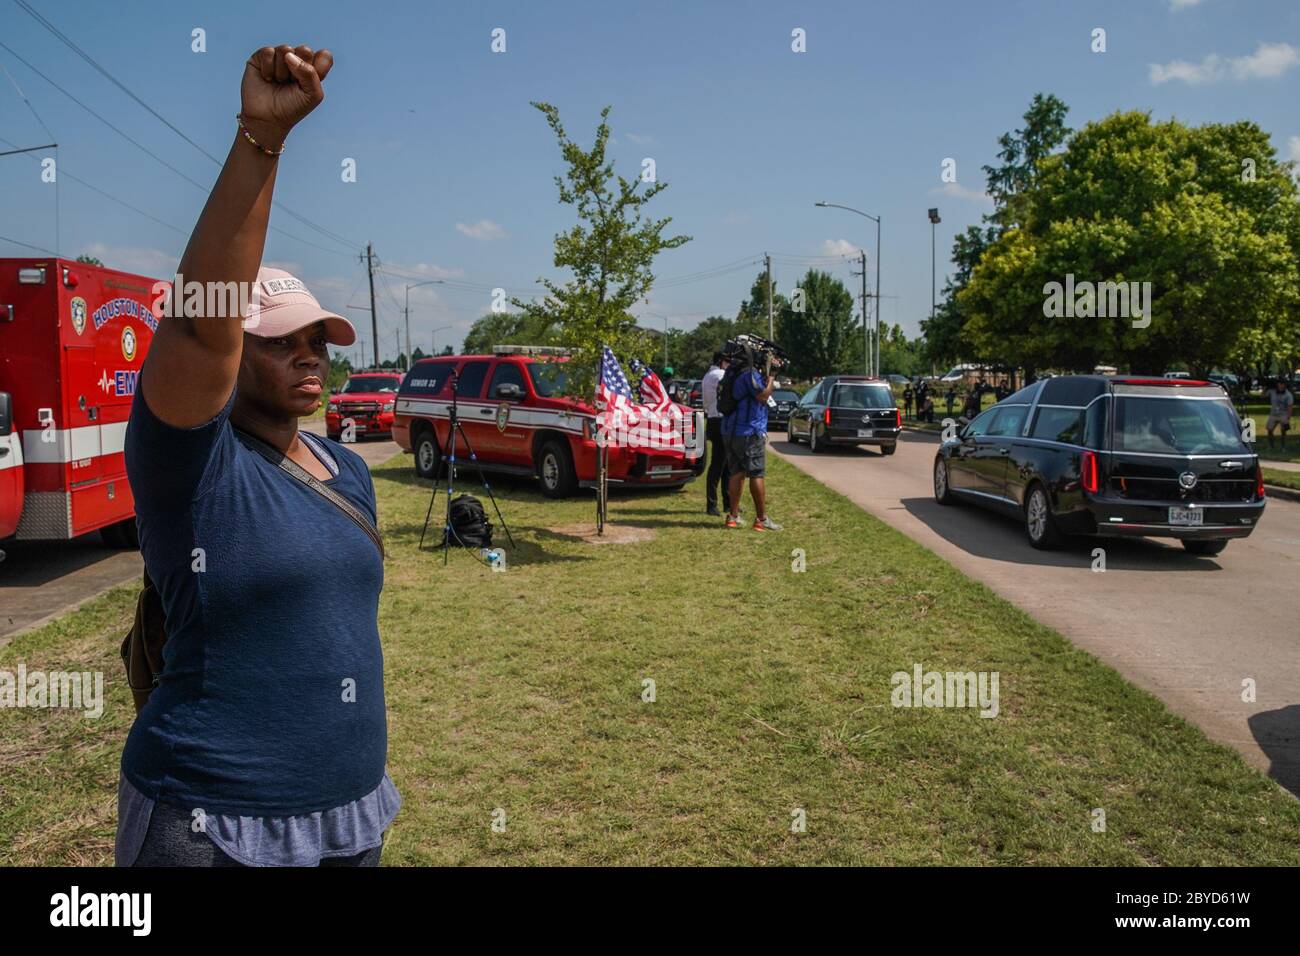 Houston, United States. 09th June, 2020. A woman raises her fist in salute as the hearse carrying the body of George Floyd to Houston Memorial Gardens passes the Fountain of Praise church in Houston, Texas on Tuesday, June 9, 2020. George Floyd died in police custody in Minneapolis, Minnesota on May 25, 2020. His death sparked demonstrations globally to combat racism and legislation in Congress for reforms. Photo by Jemal Countess/UPI Credit: UPI/Alamy Live News Stock Photo